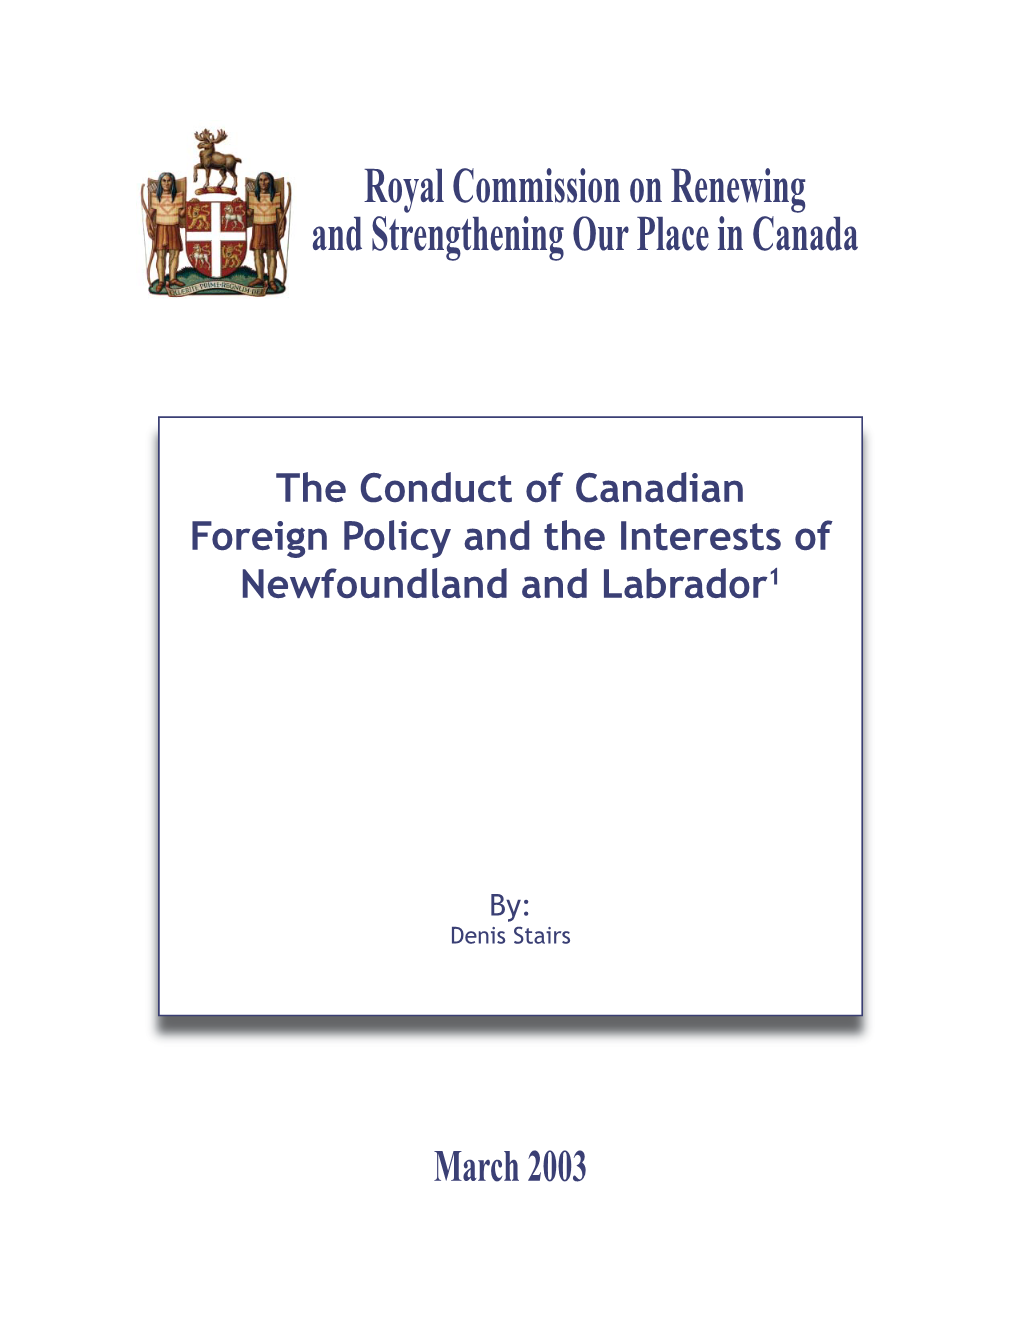 The Conduct of Canadian Foreign Policy and the Interests of Newfoundland and Labrador1